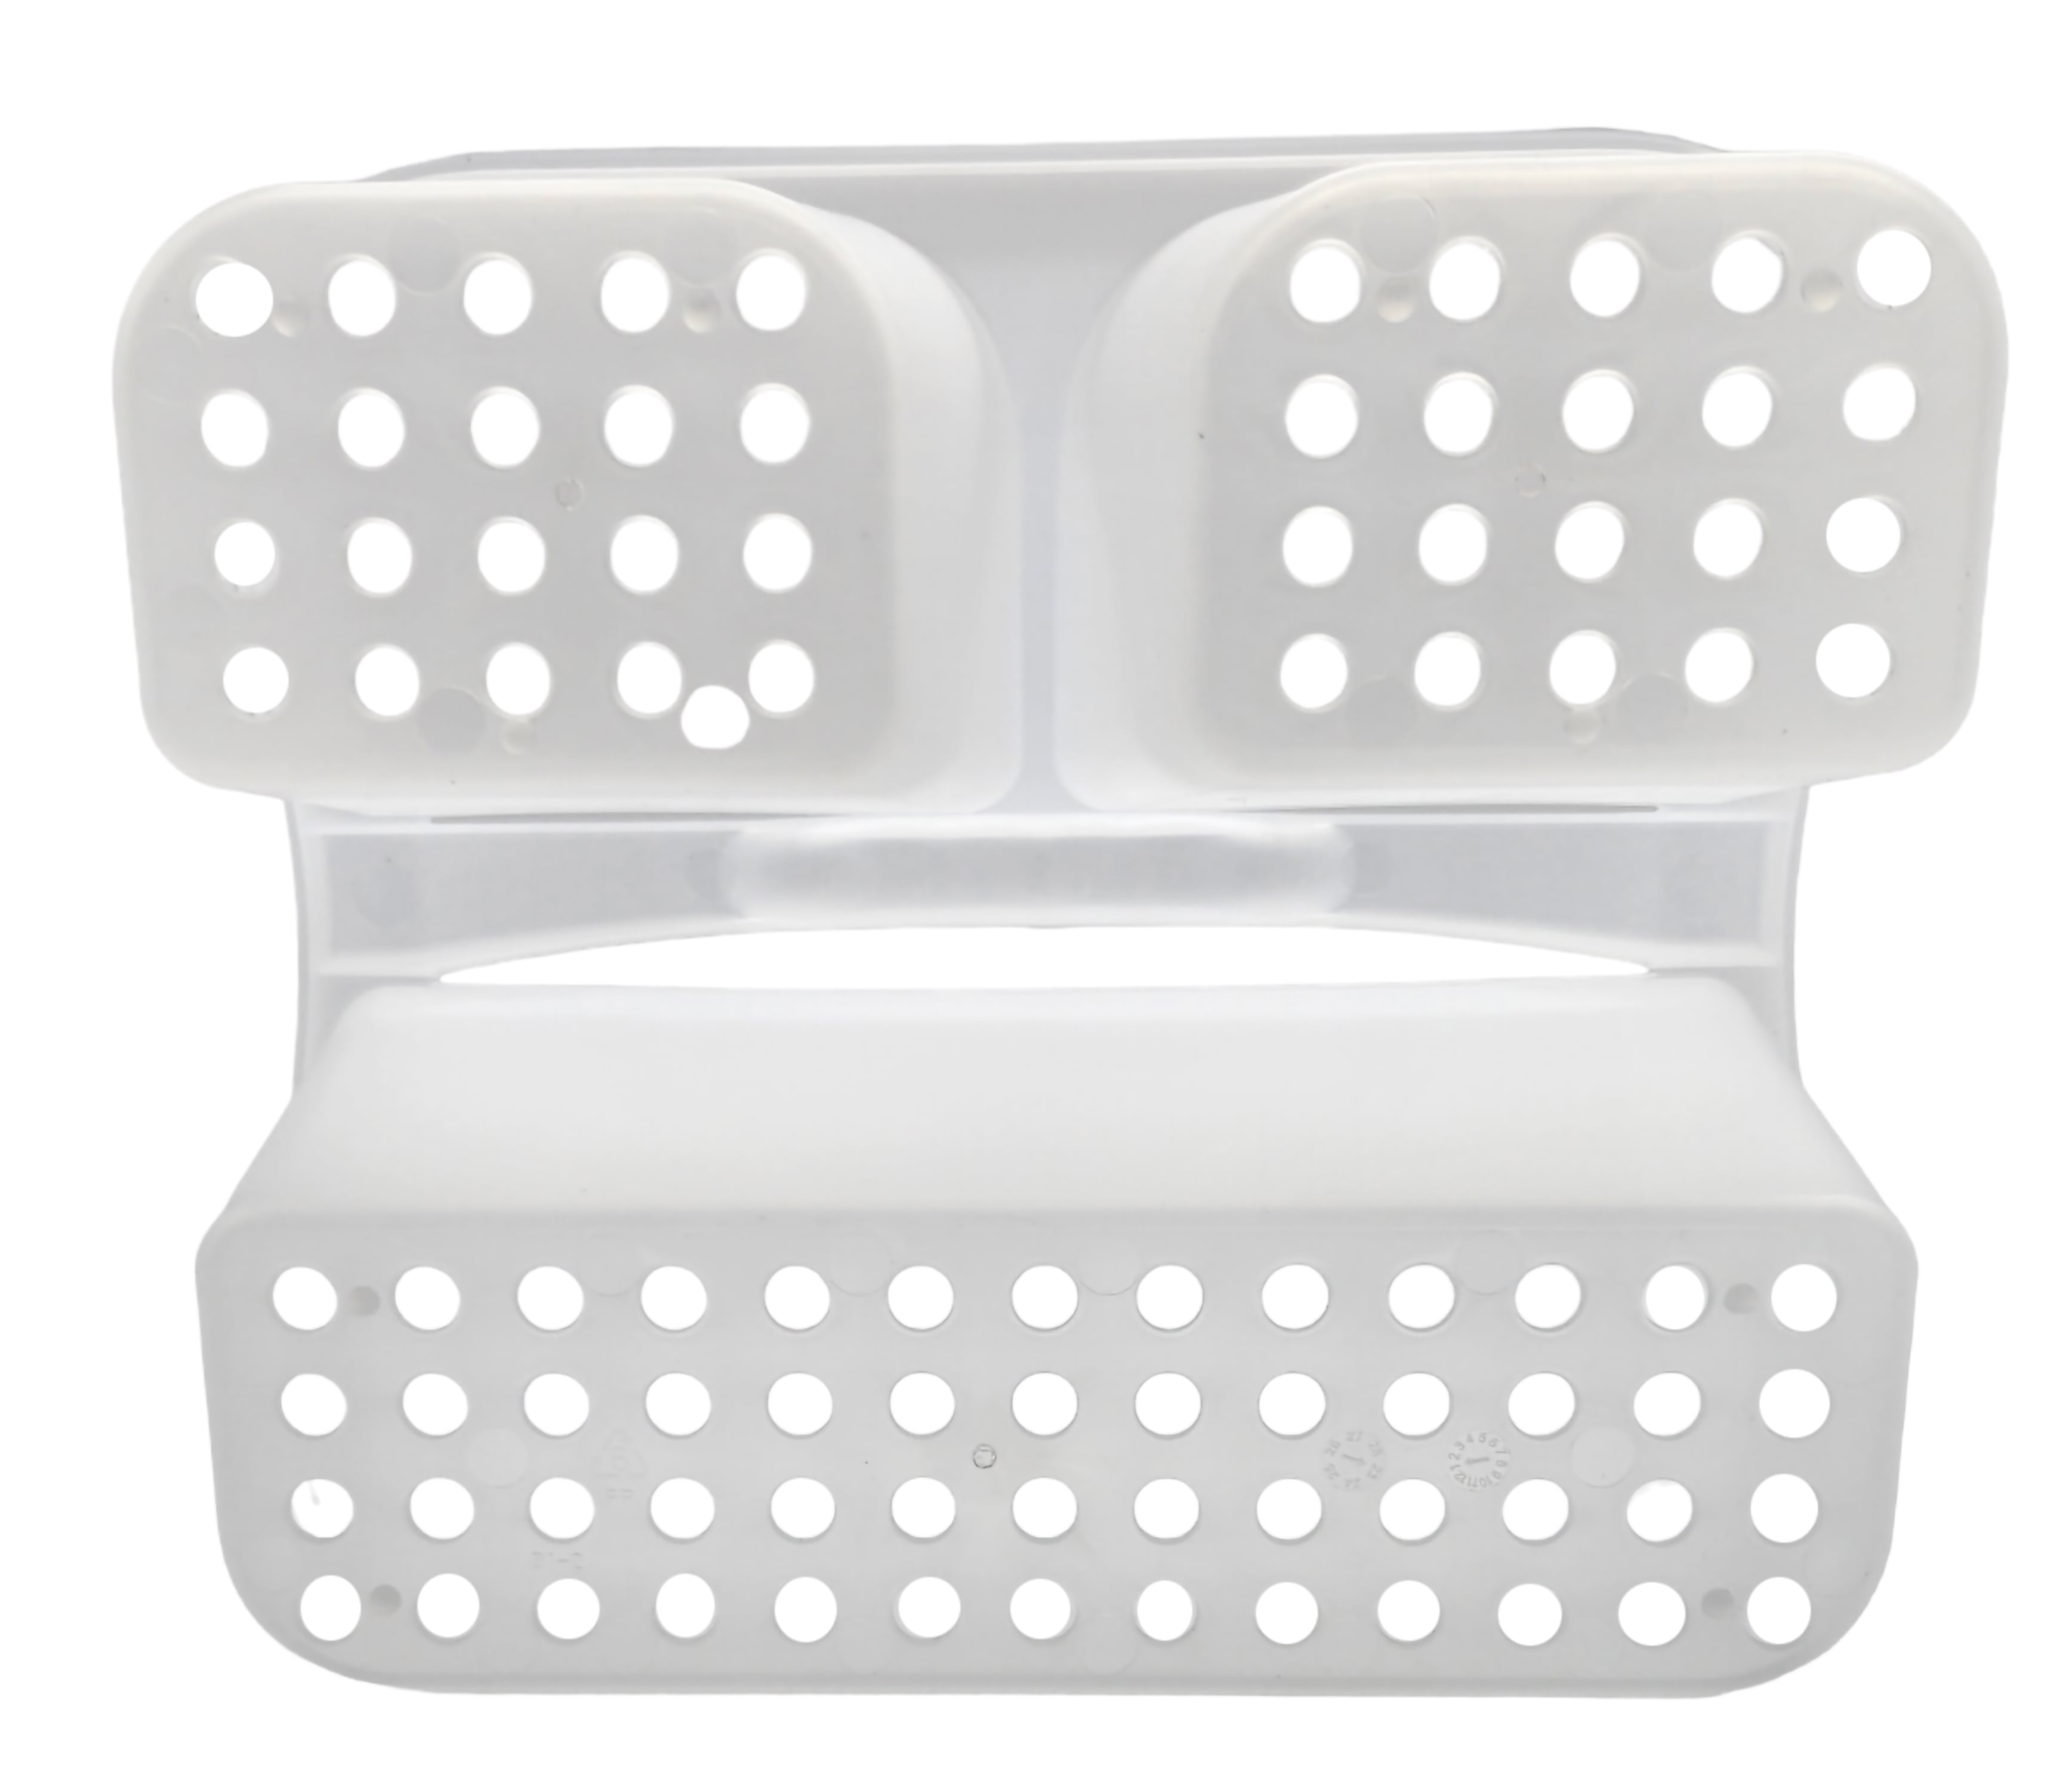 Mainstays Large Over The Shower Caddy, 2 Shelves, 1 Deep Basket, Heavy Duty Plastic, Frosty Finish, Size: Large, Family-Sized